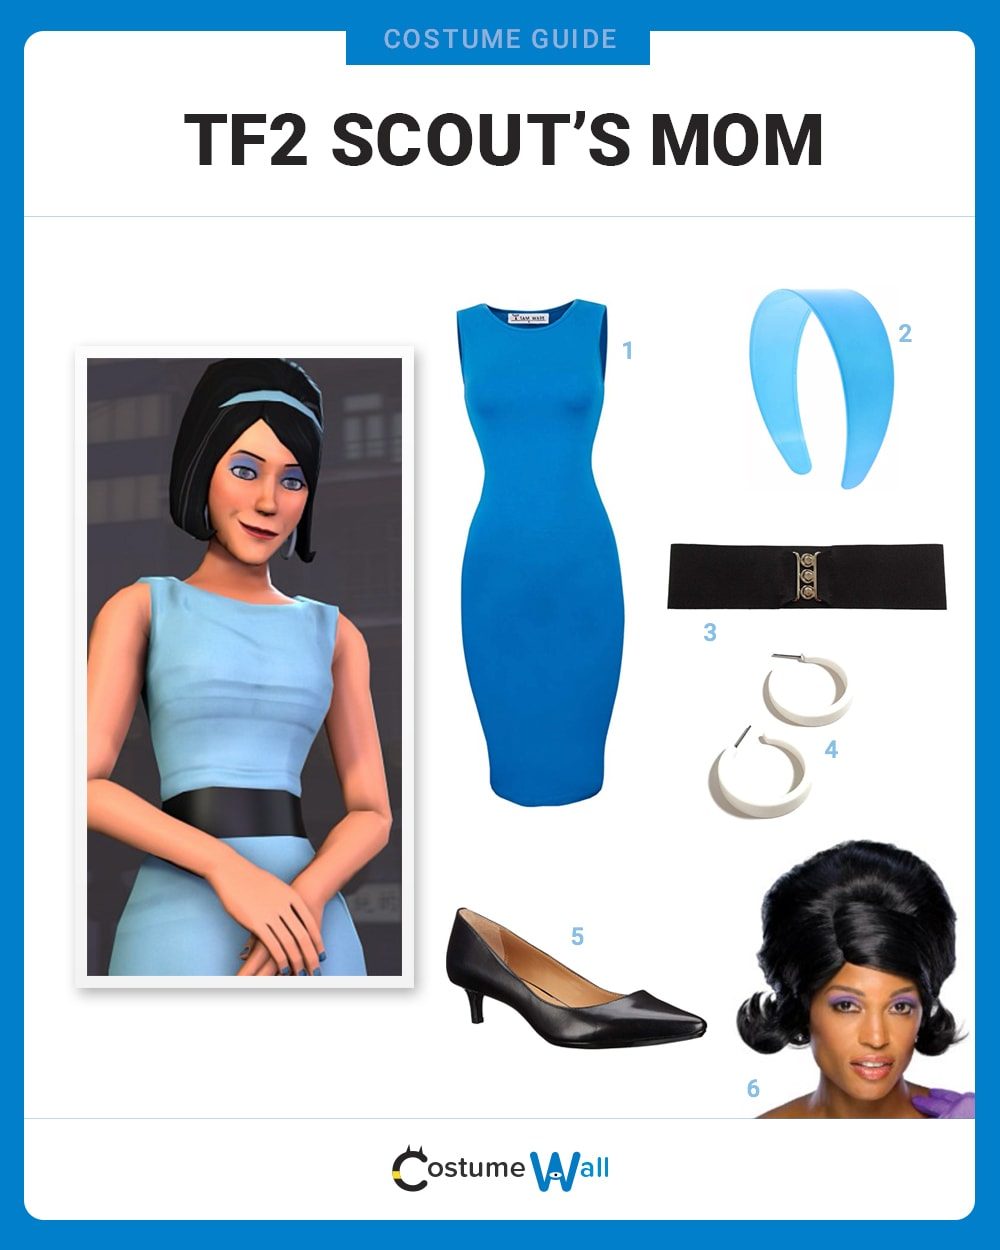 TF2 Scout's Mom Costume Guide